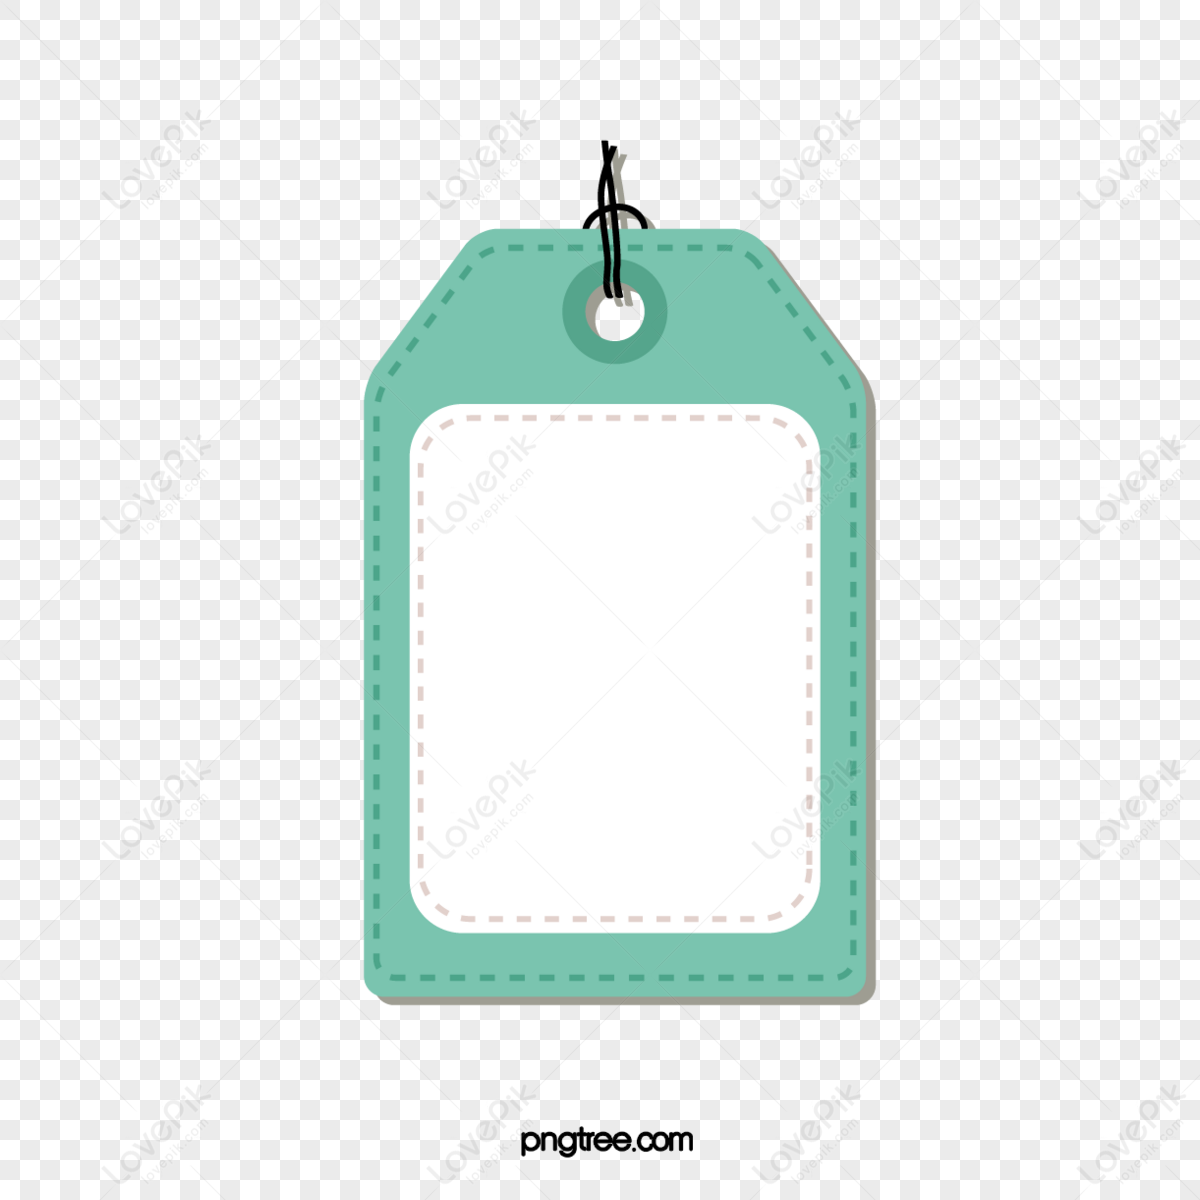 Blue Stereoplane Luggage Card,stereoscopic,information,aircraft png hd transparent image